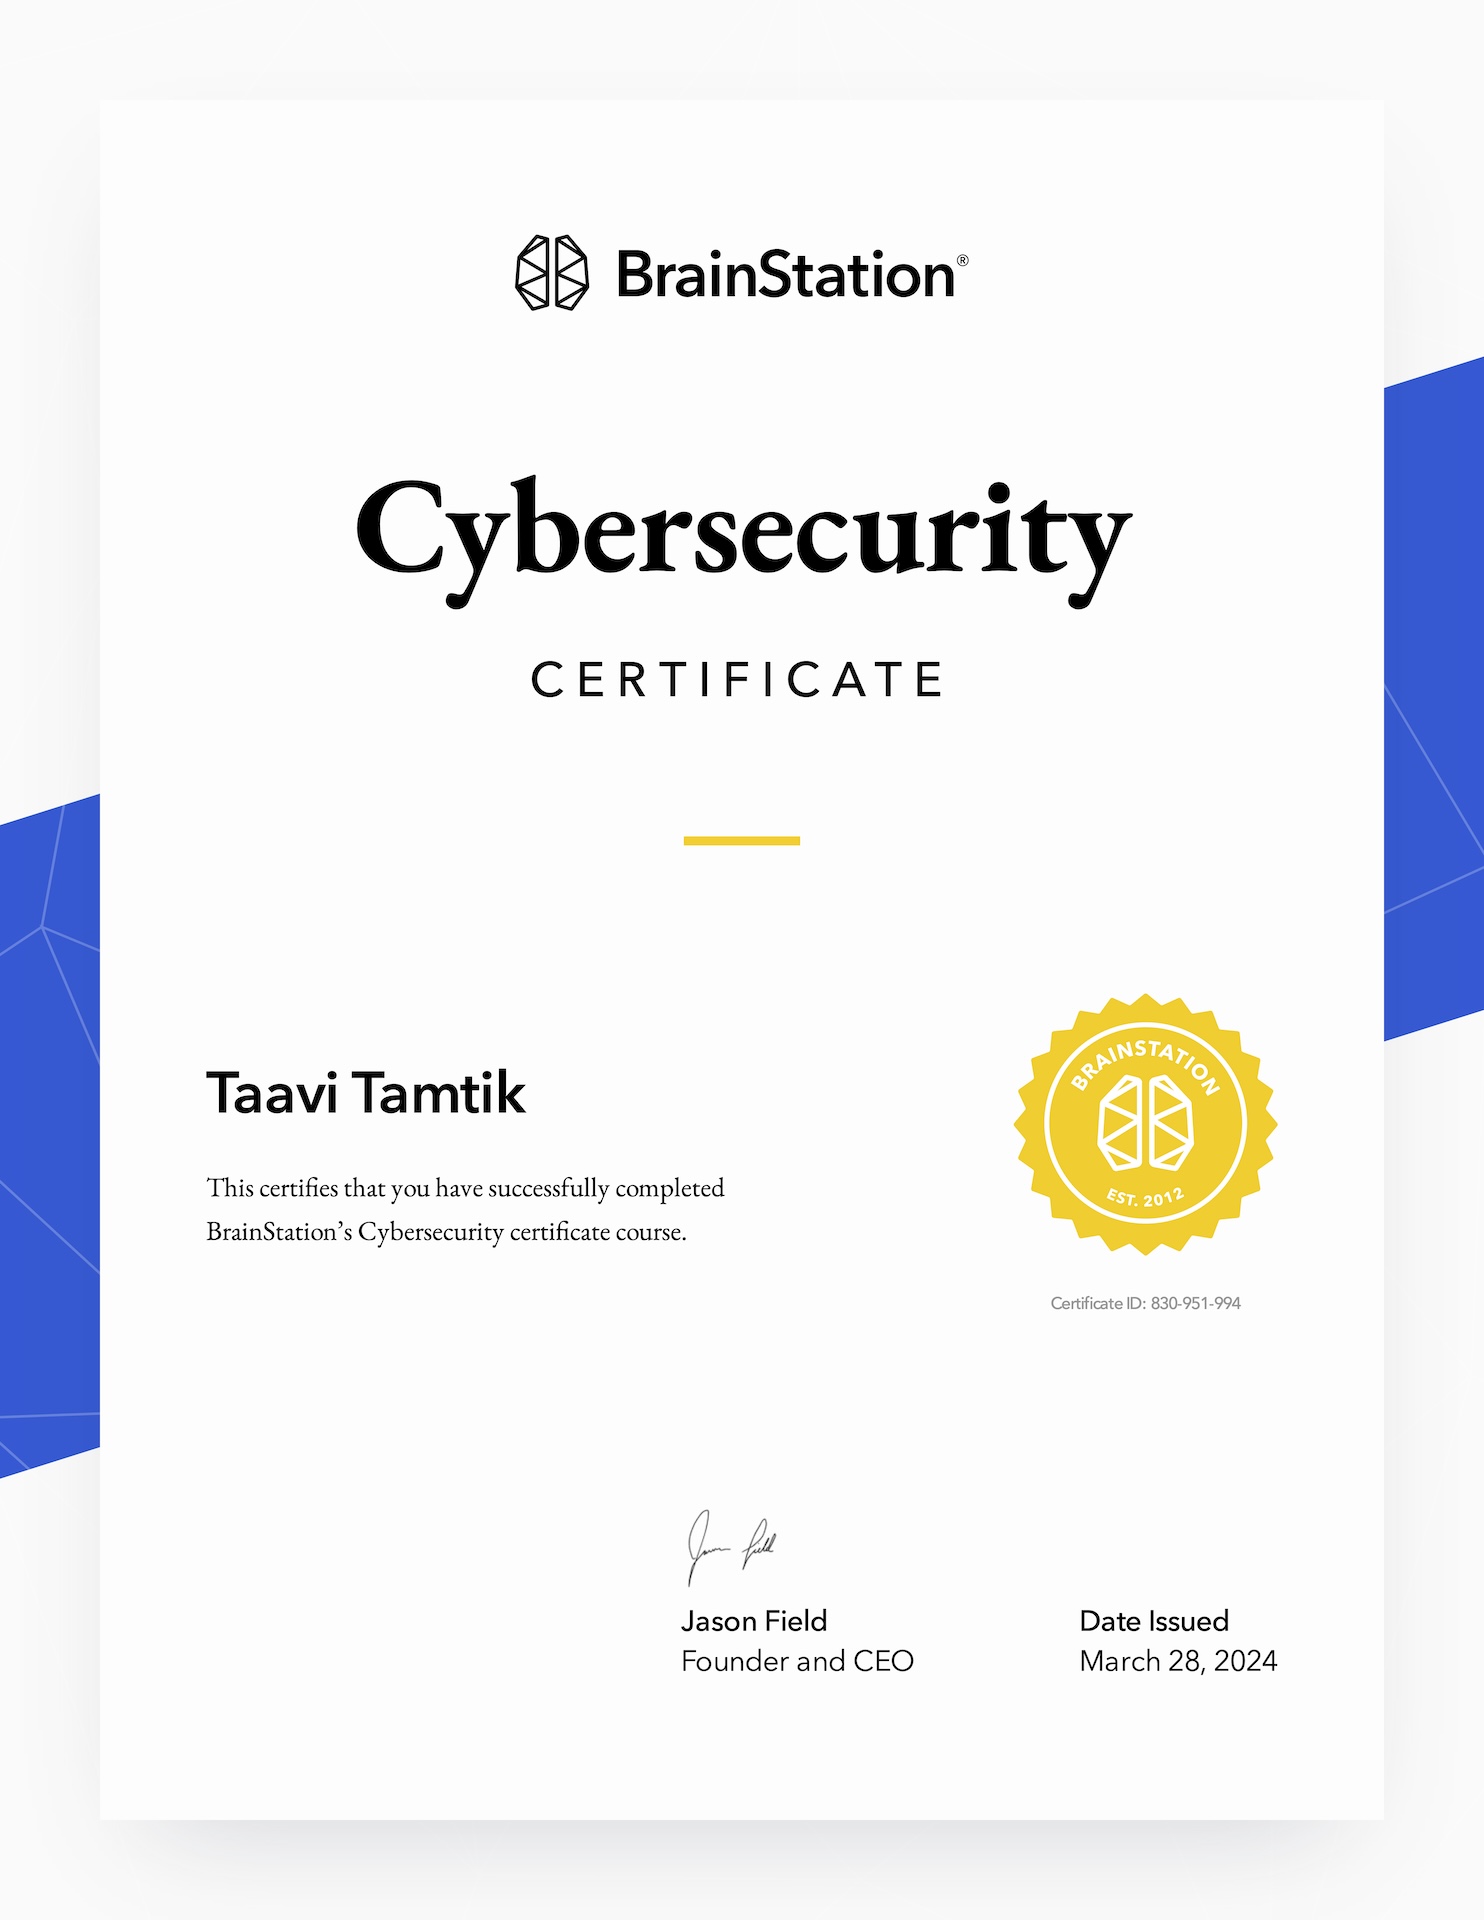 Cybersecurity Certificate by BrainStation